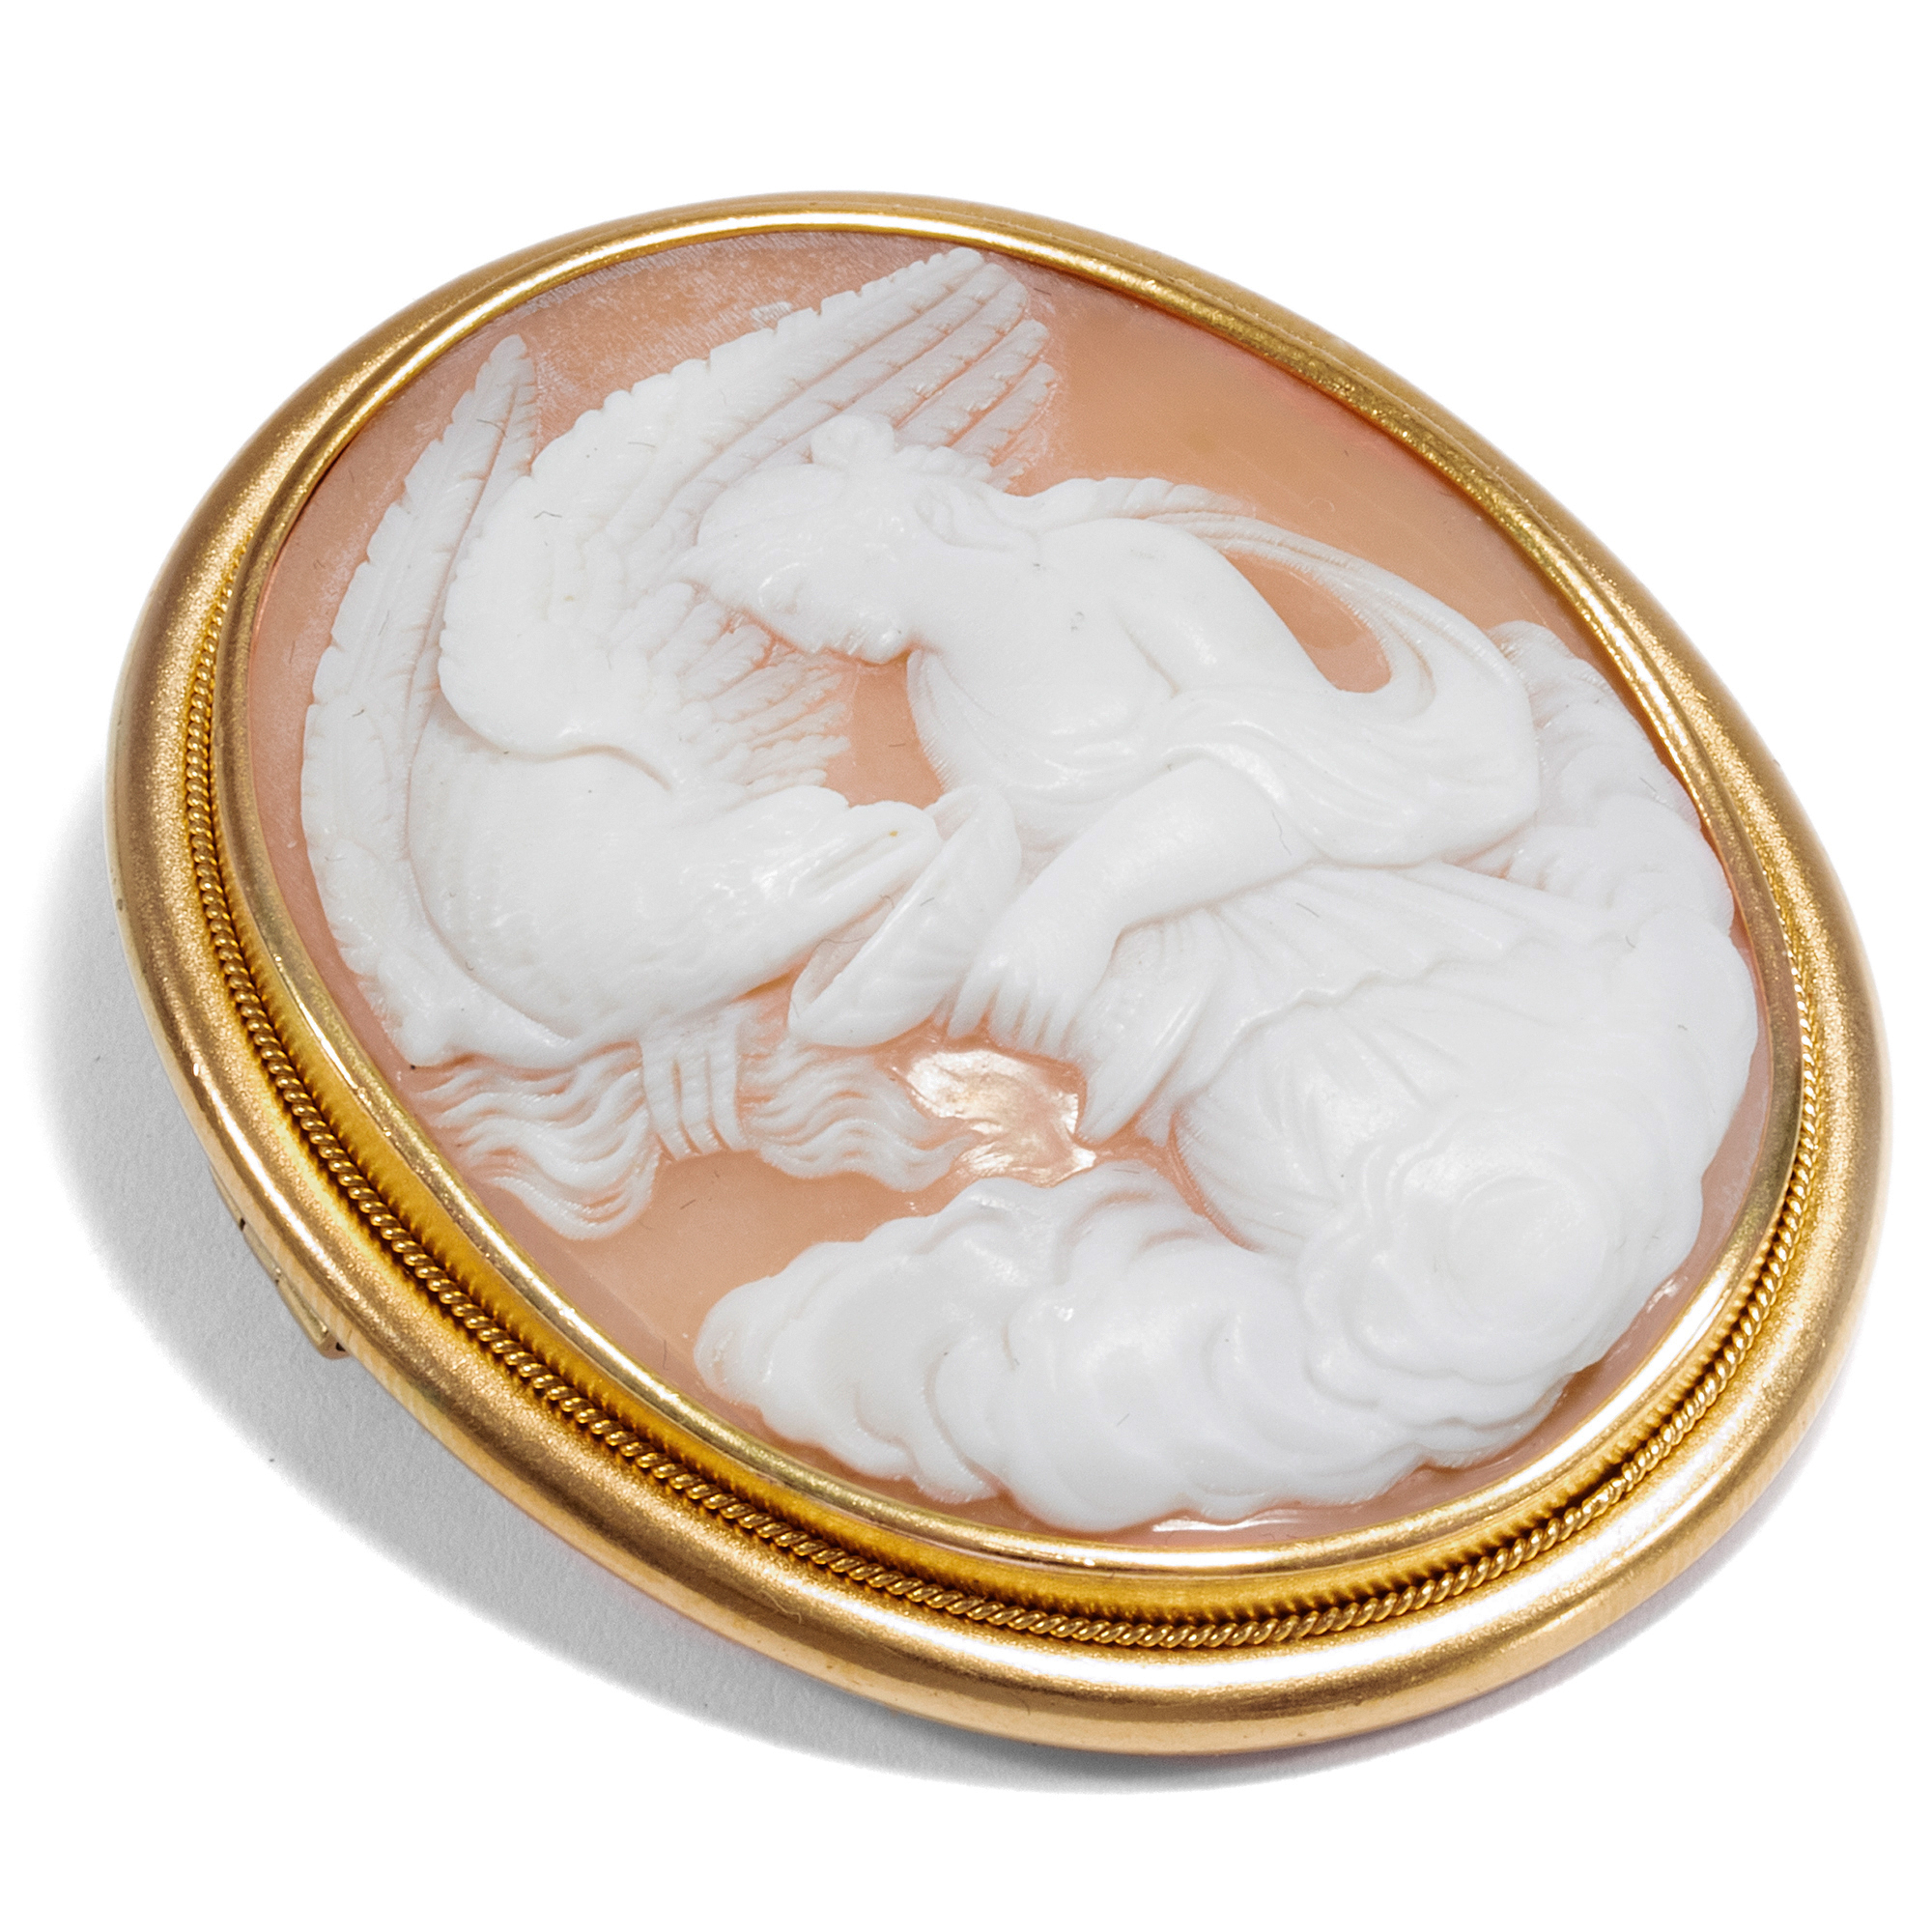 Antique Shell Cameo With Depiction of the Hebe, Naples/Vienna ca. 1880